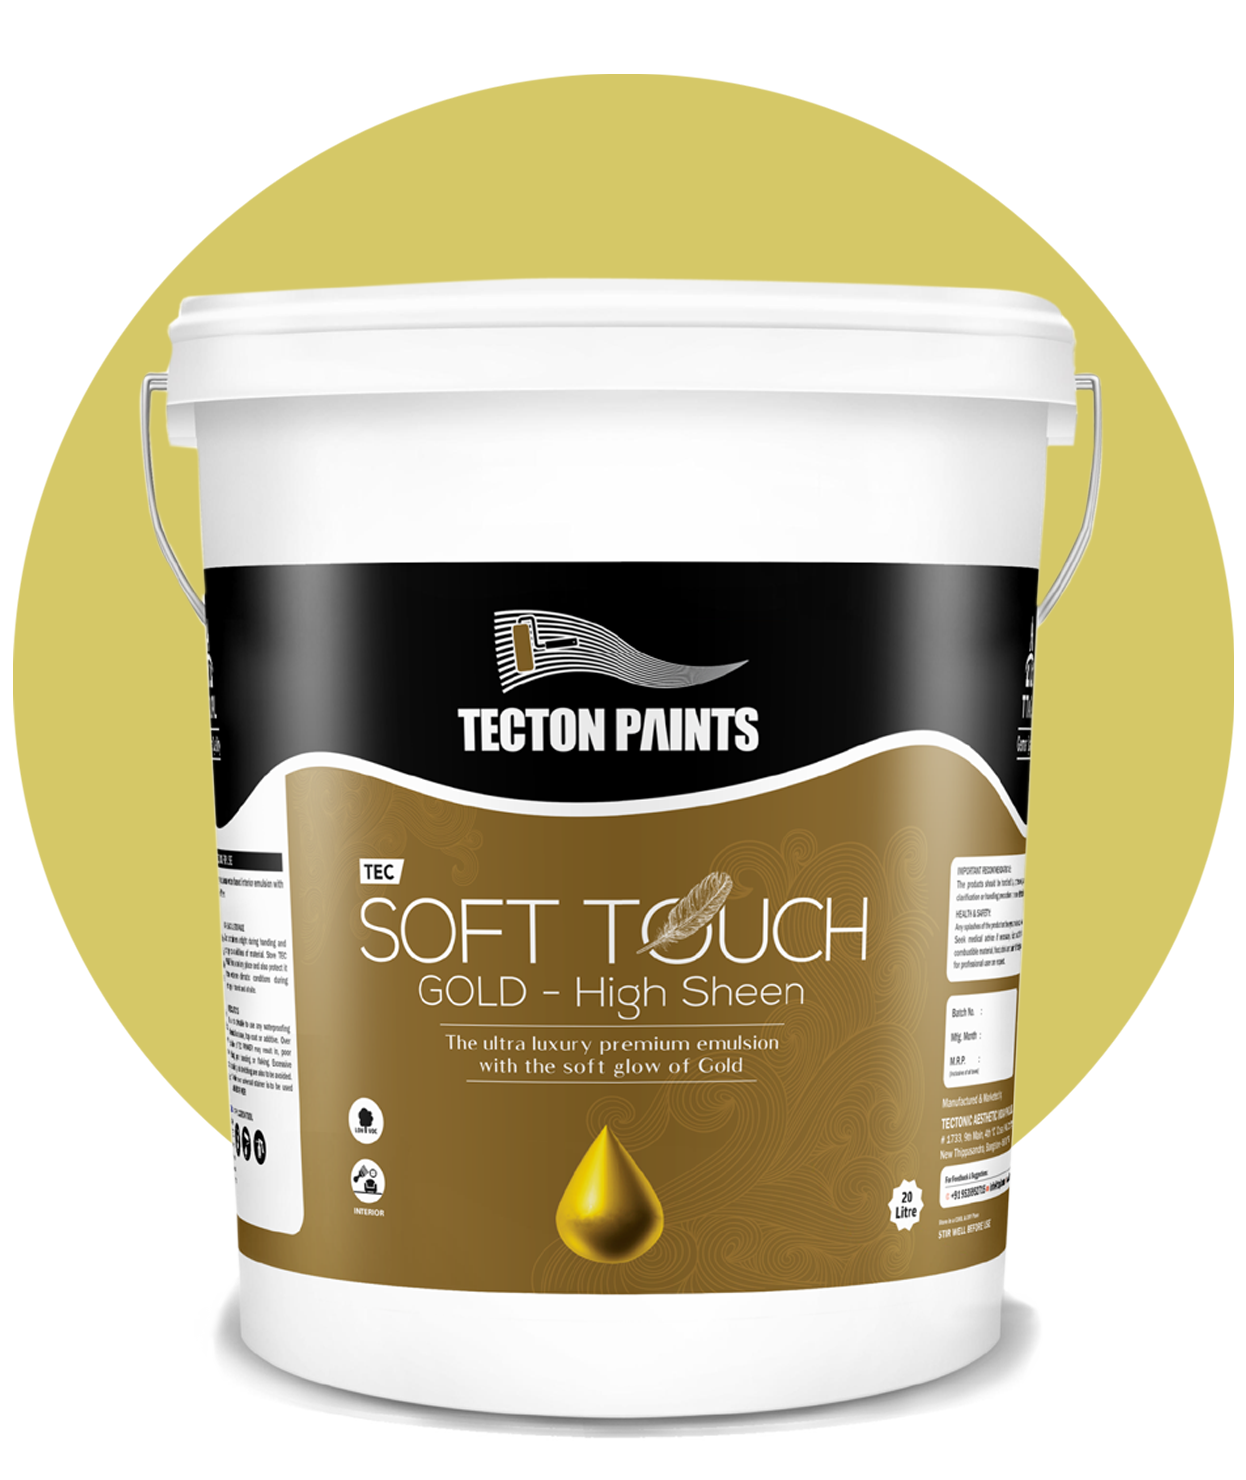 Soft touch gold